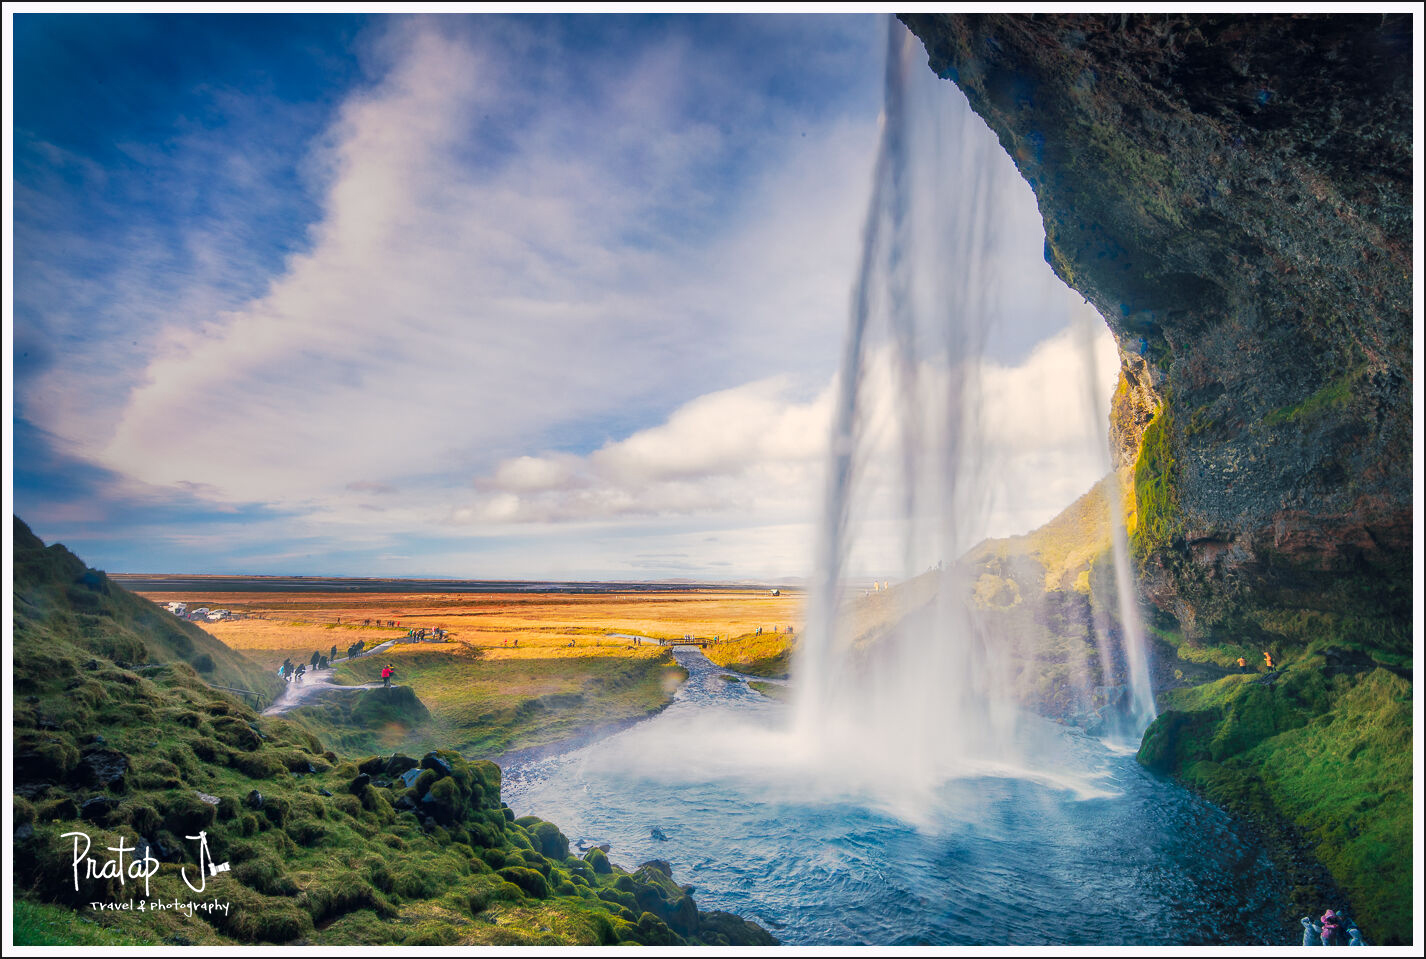 View from behind the seljalandsfoss waterfall